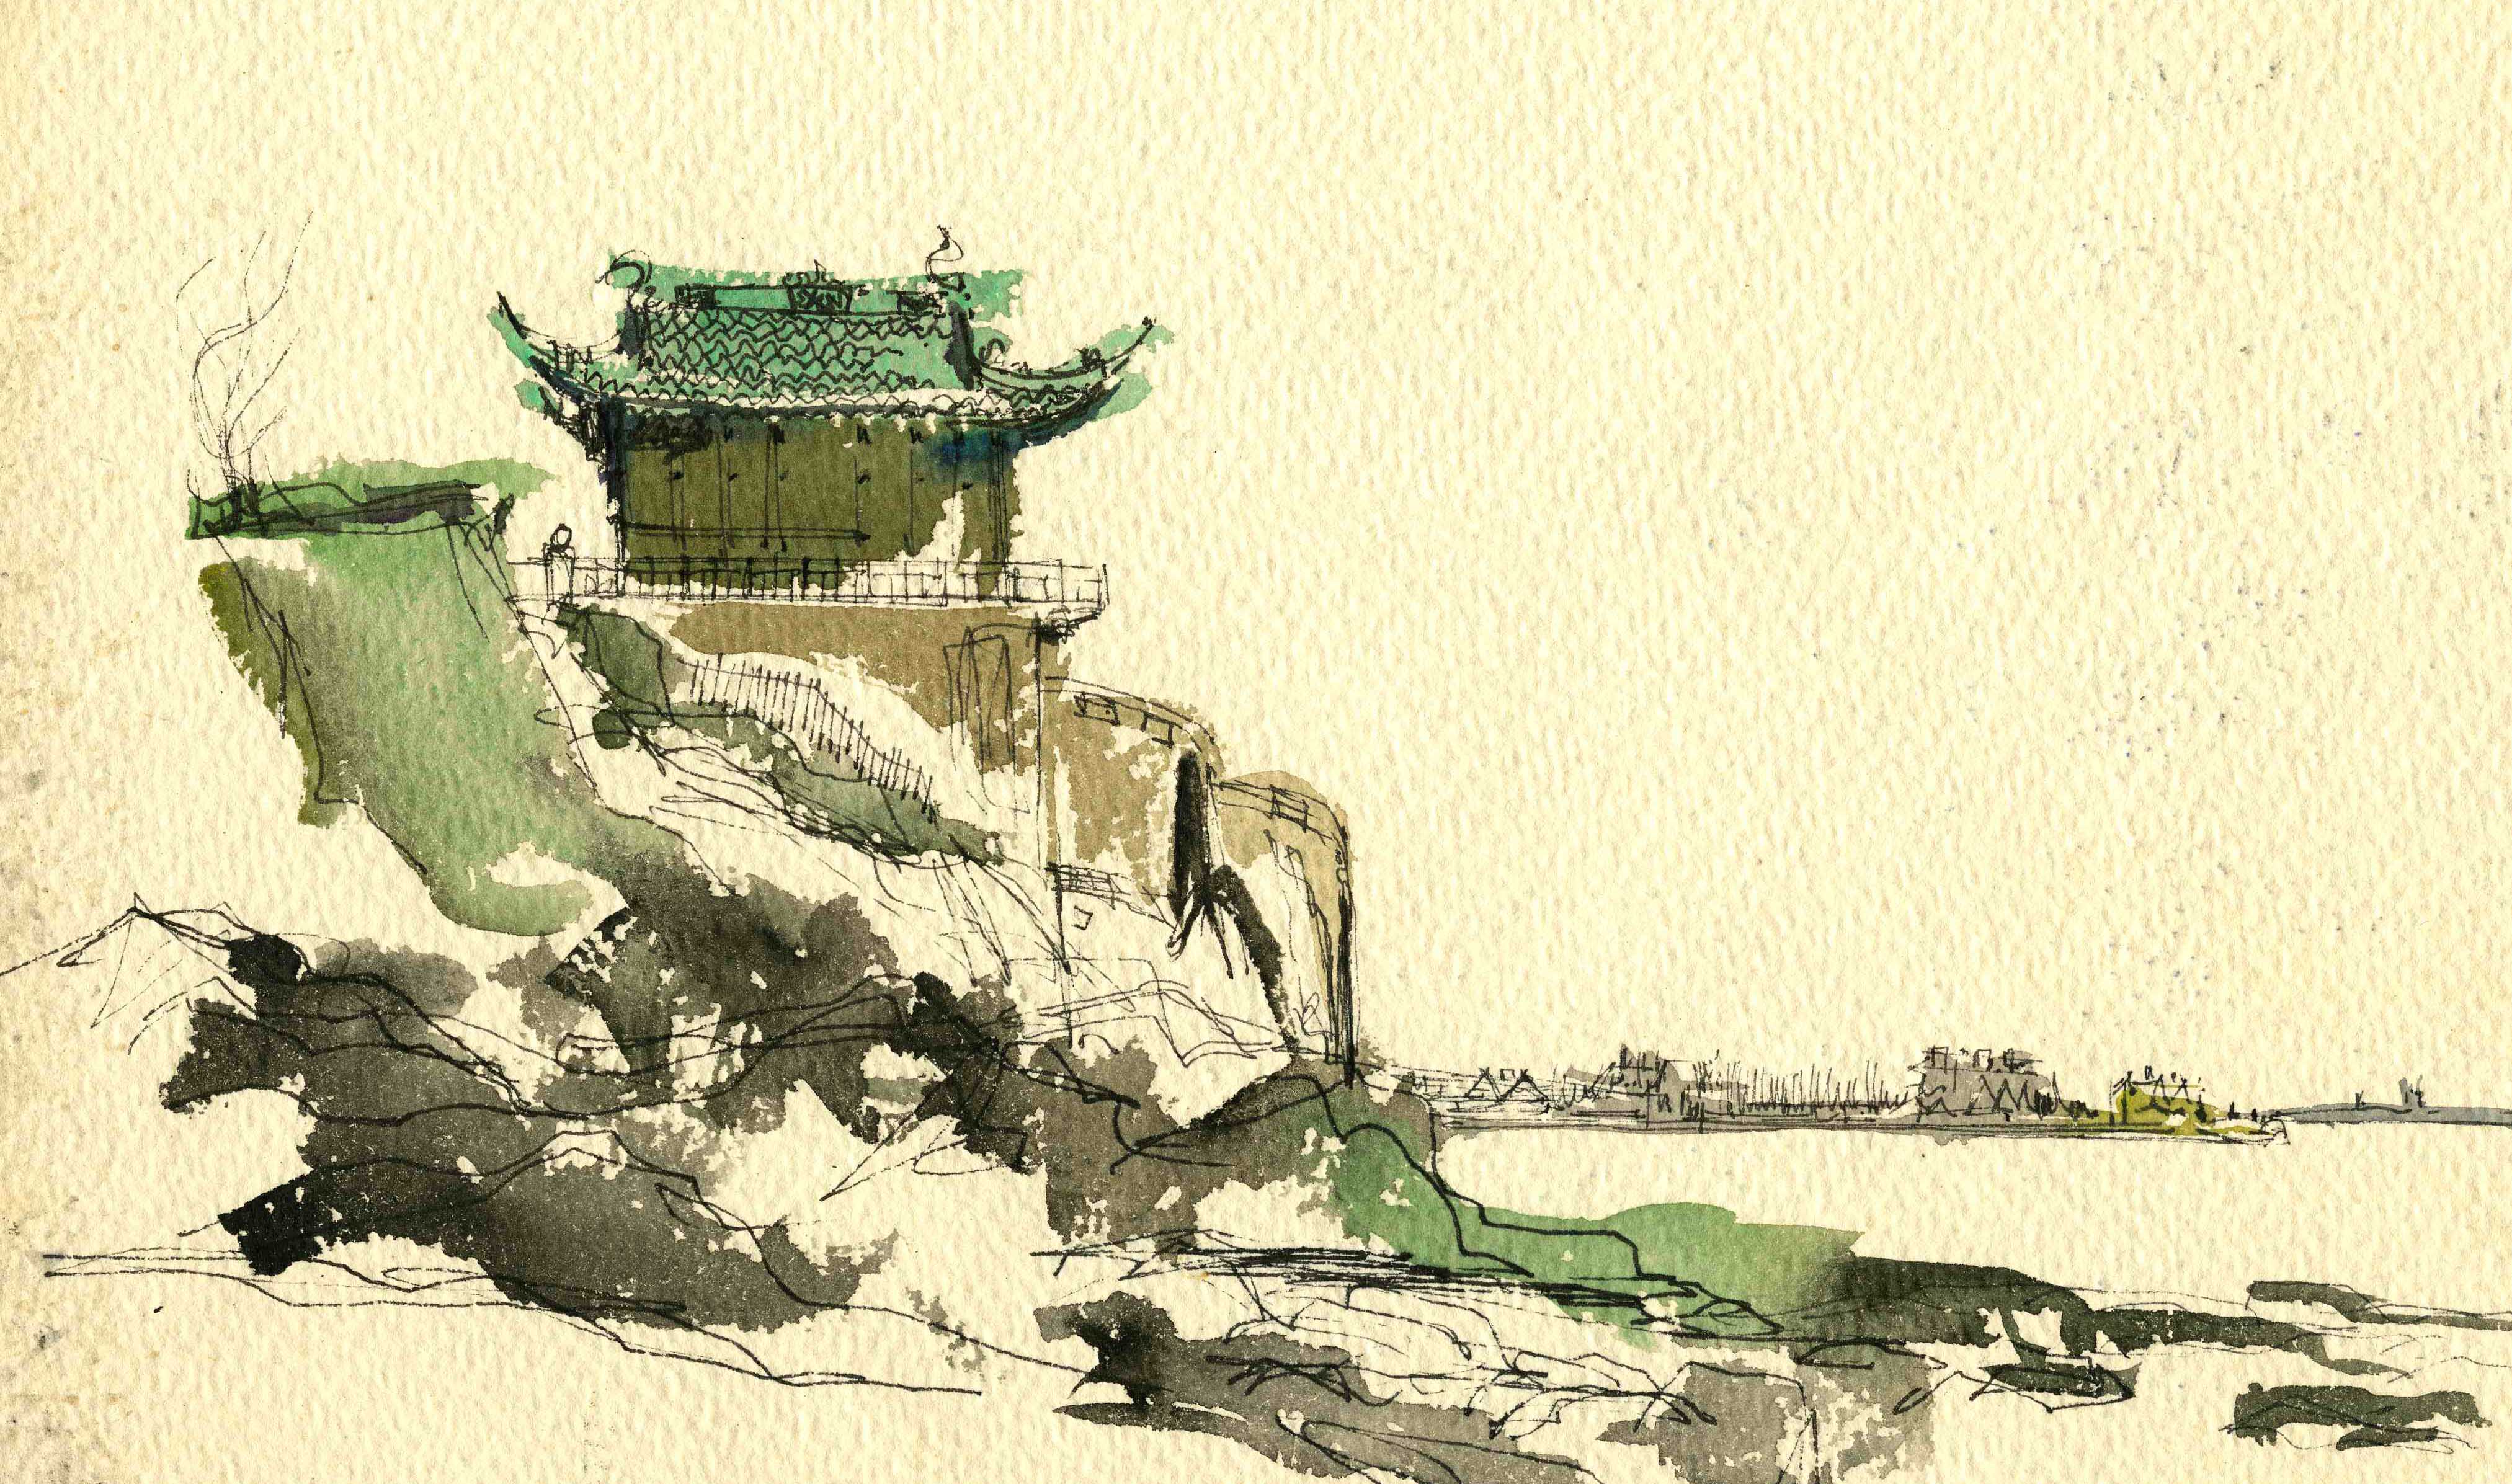 Image is of a Charles W. Moore watercolor of a temple.